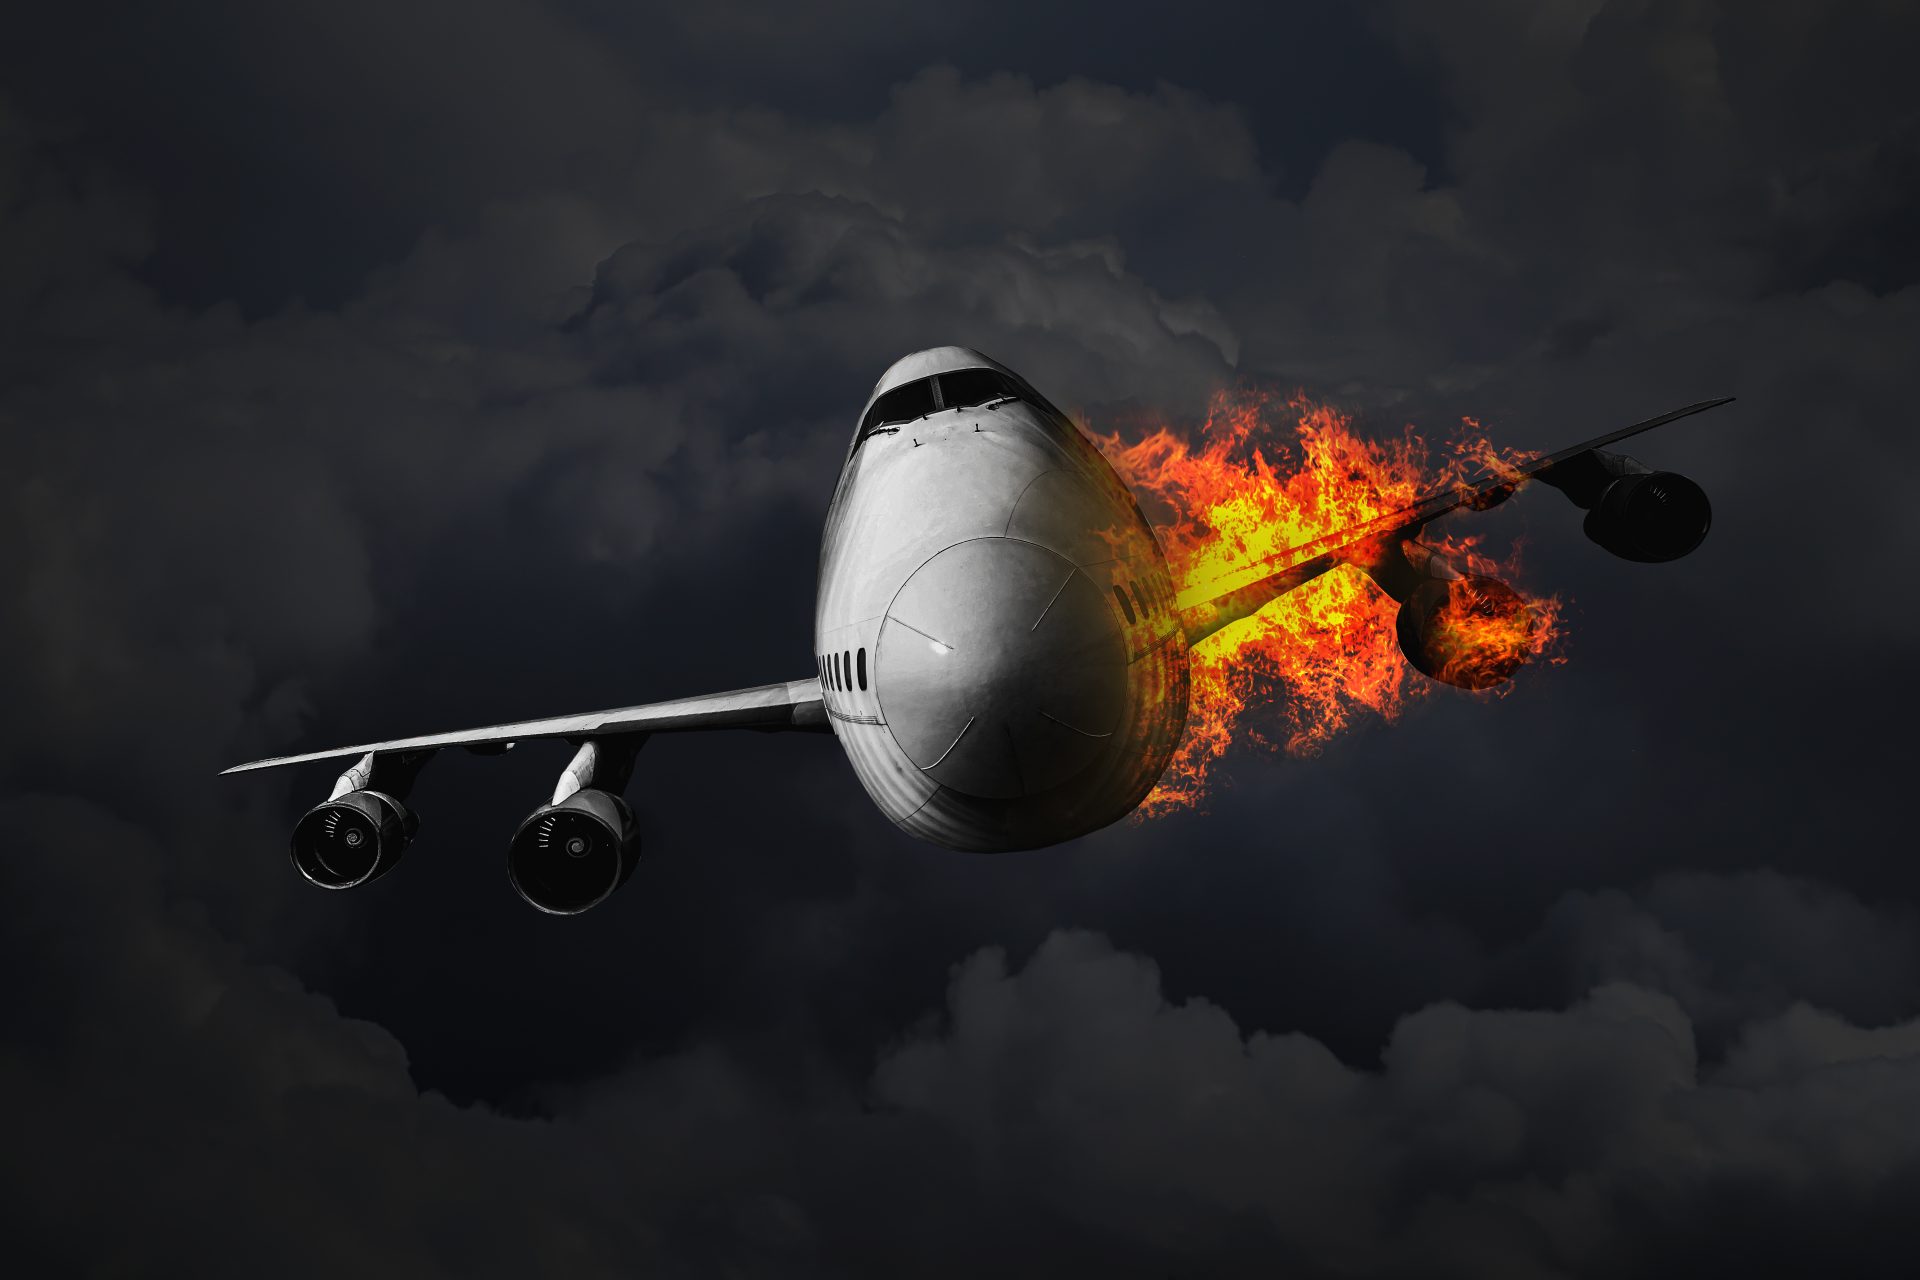 Which airlines have had the most crashes?